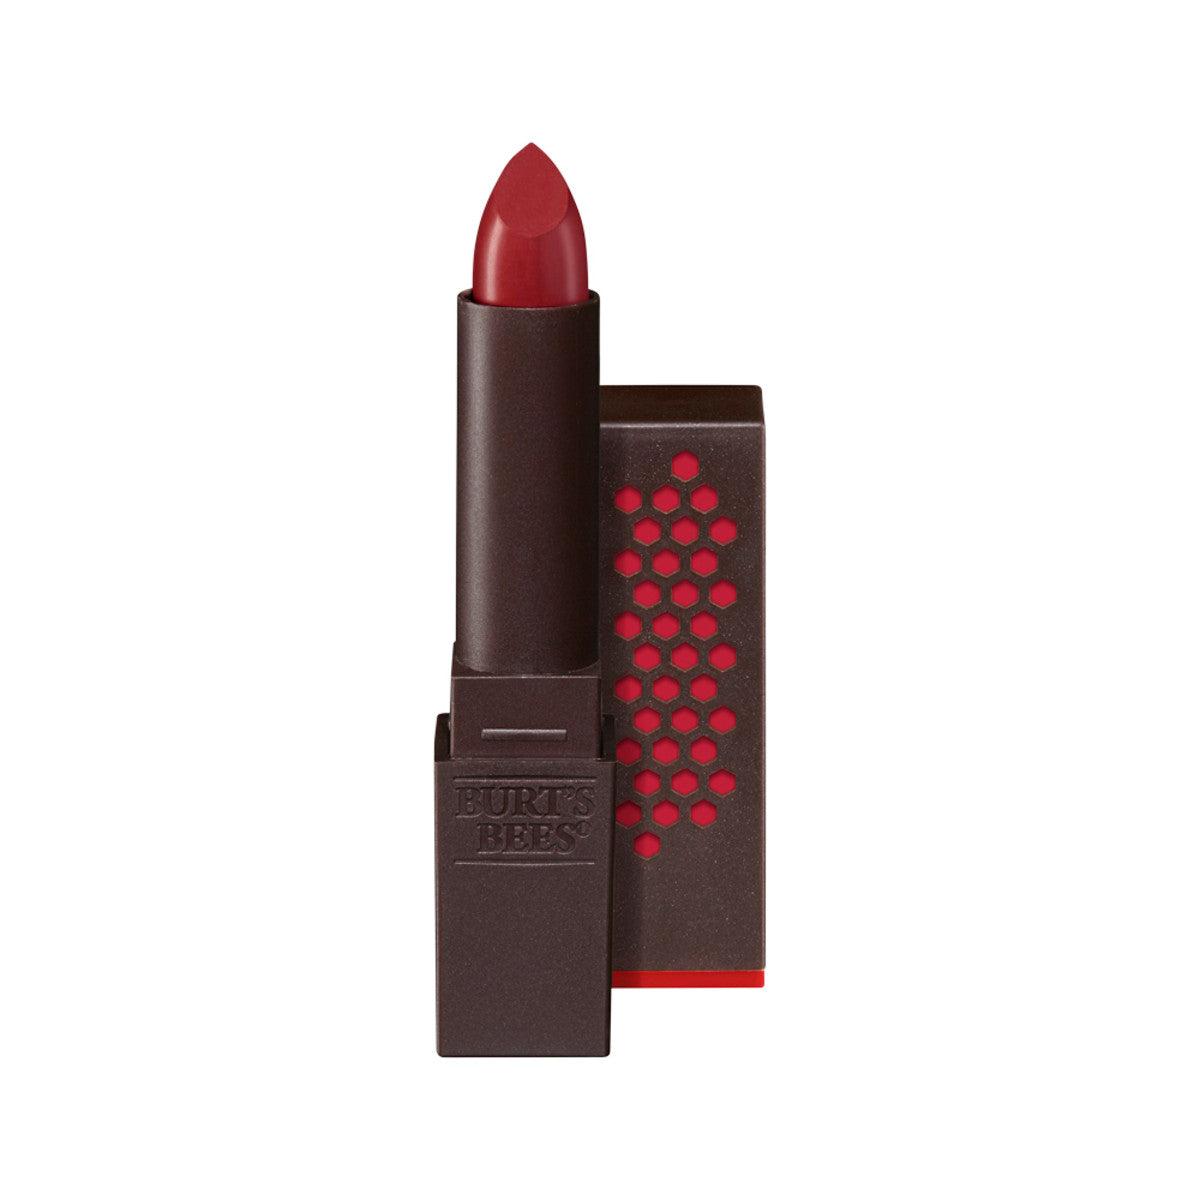 Burts Bees - Lipstick Scarlet Soaked